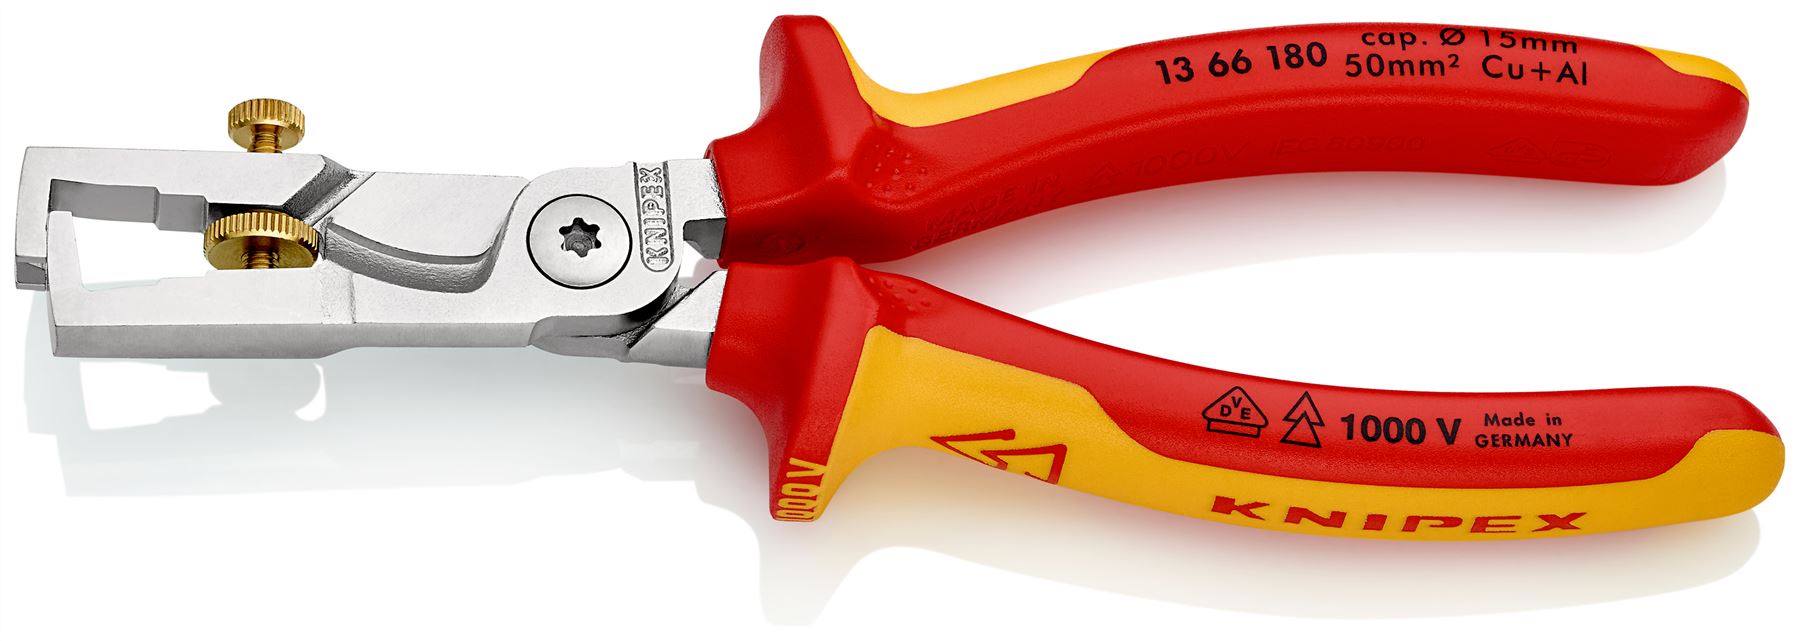 KNIPEX StriX Insulation Strippers with Cable Shears 180mm VDE Chrome Multi Component Grips 13 66 180 SB